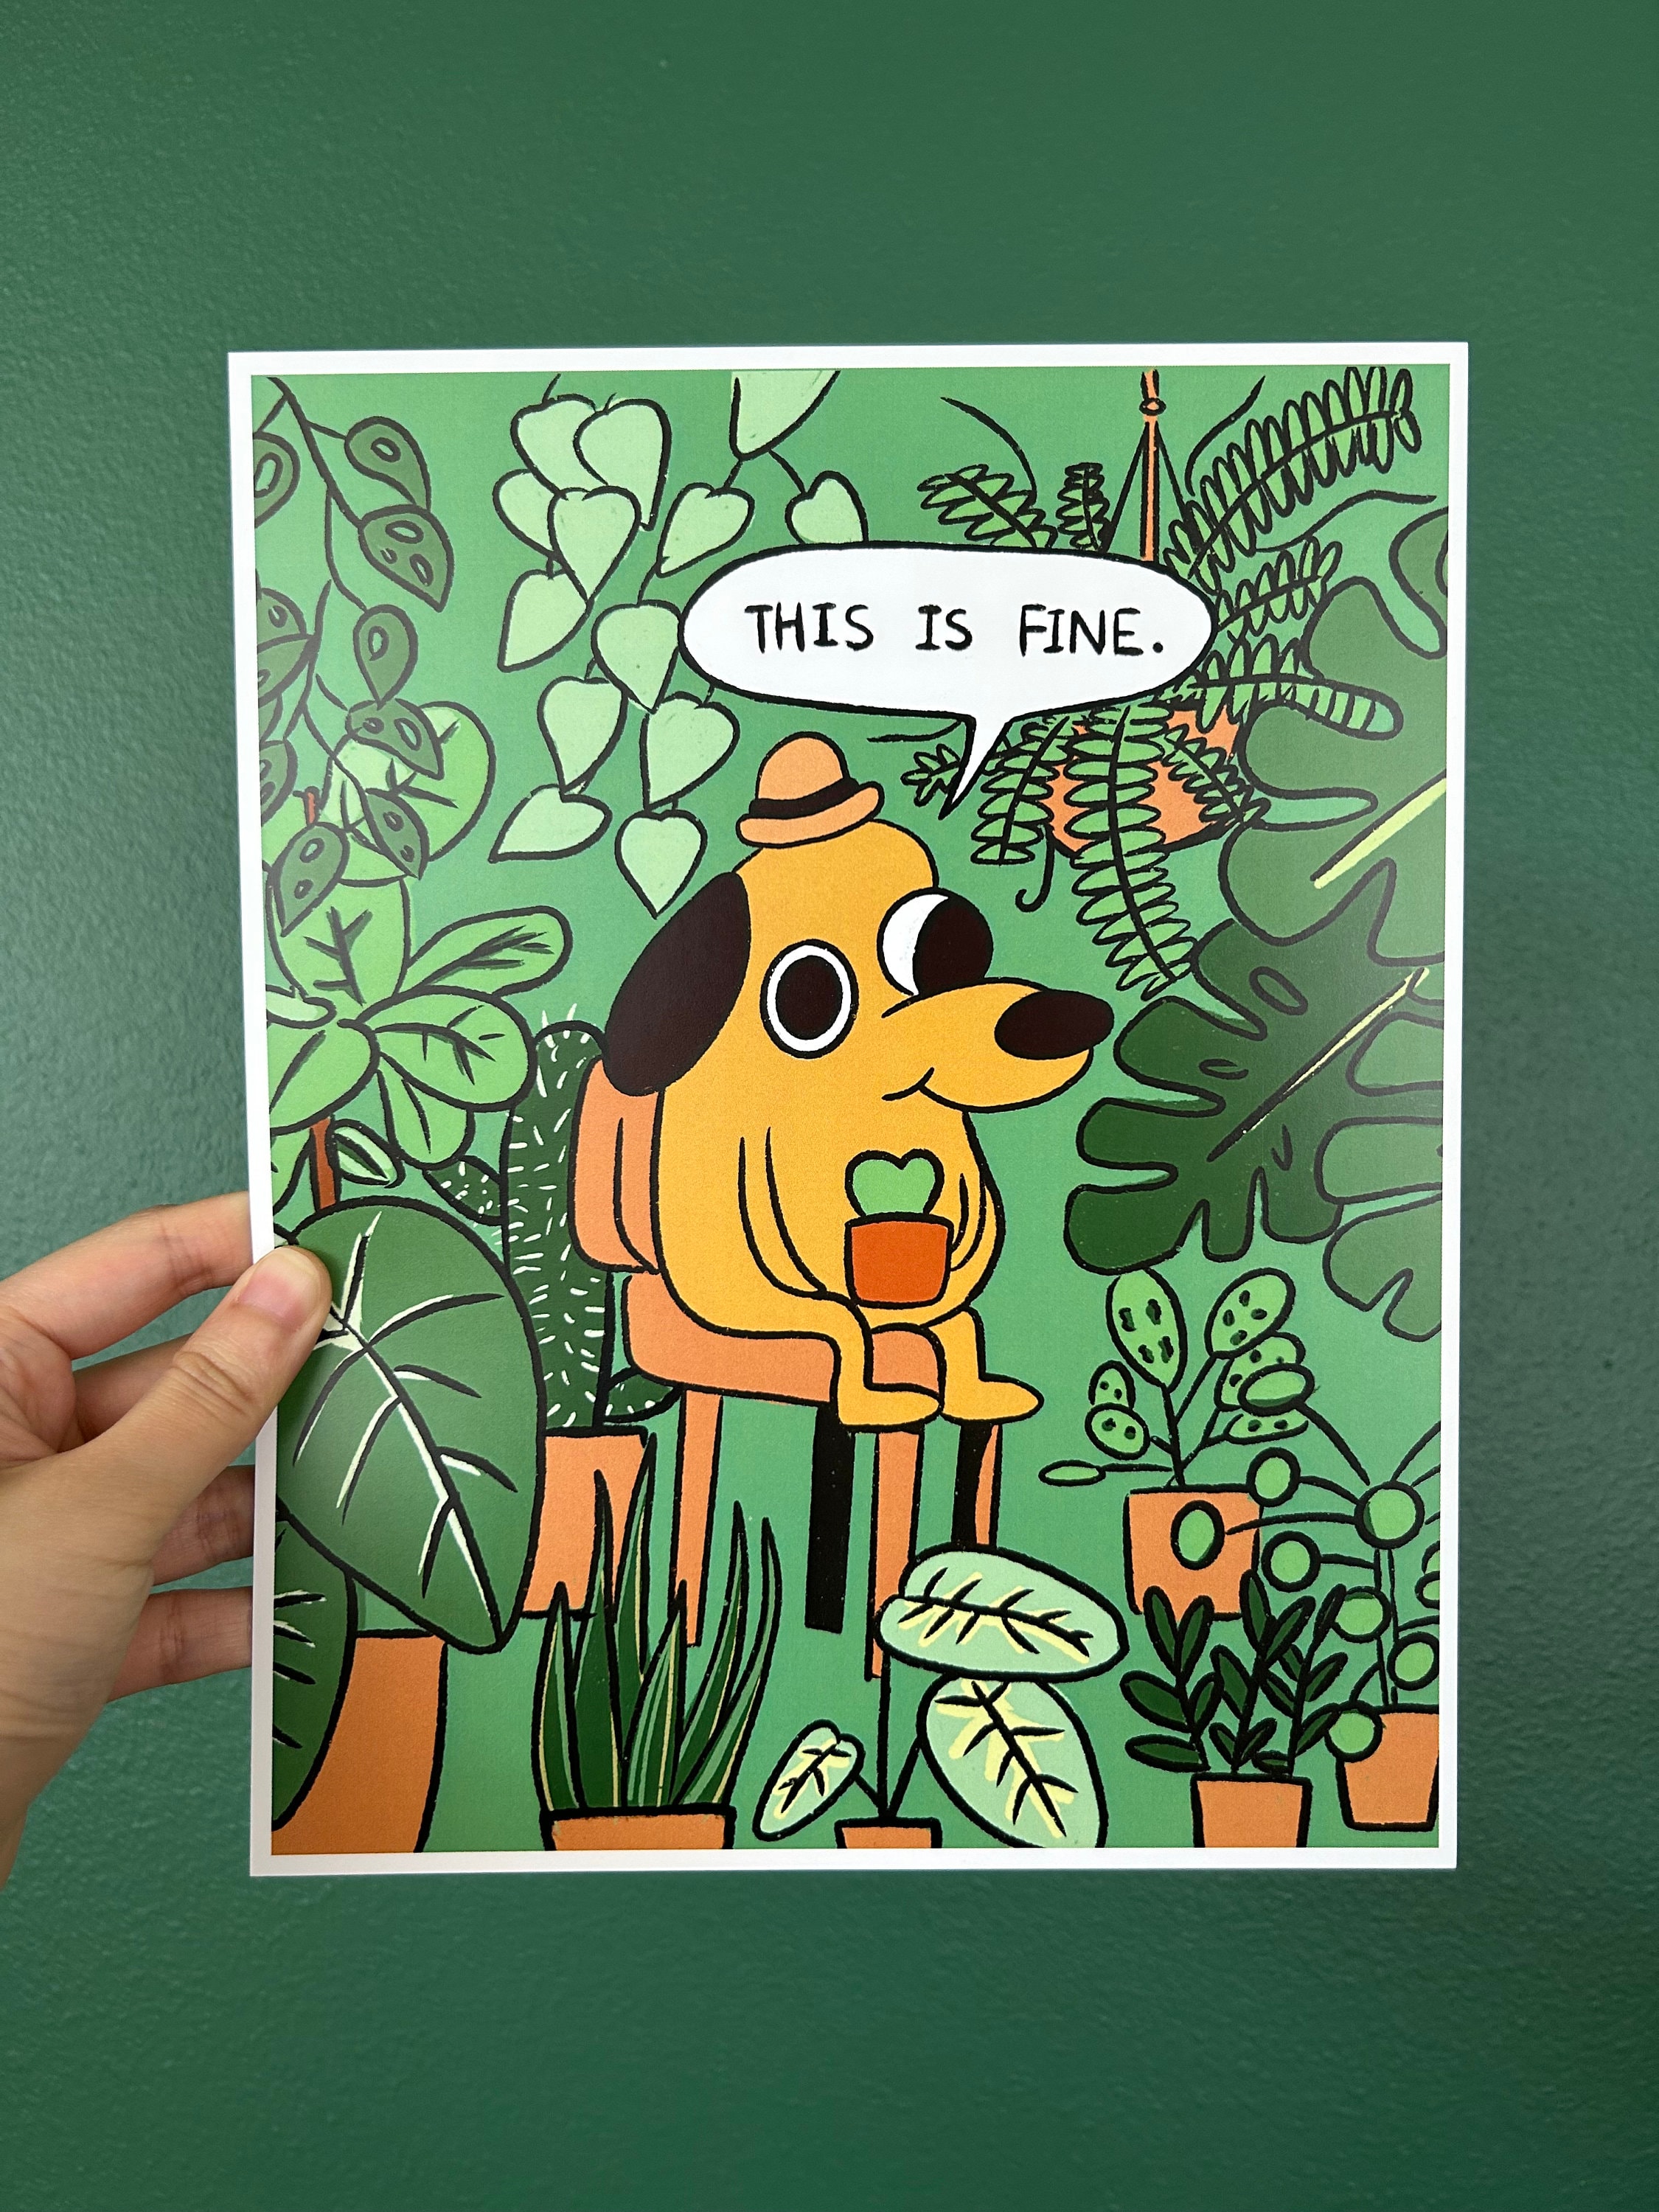 This is fine: The artist behind the meme